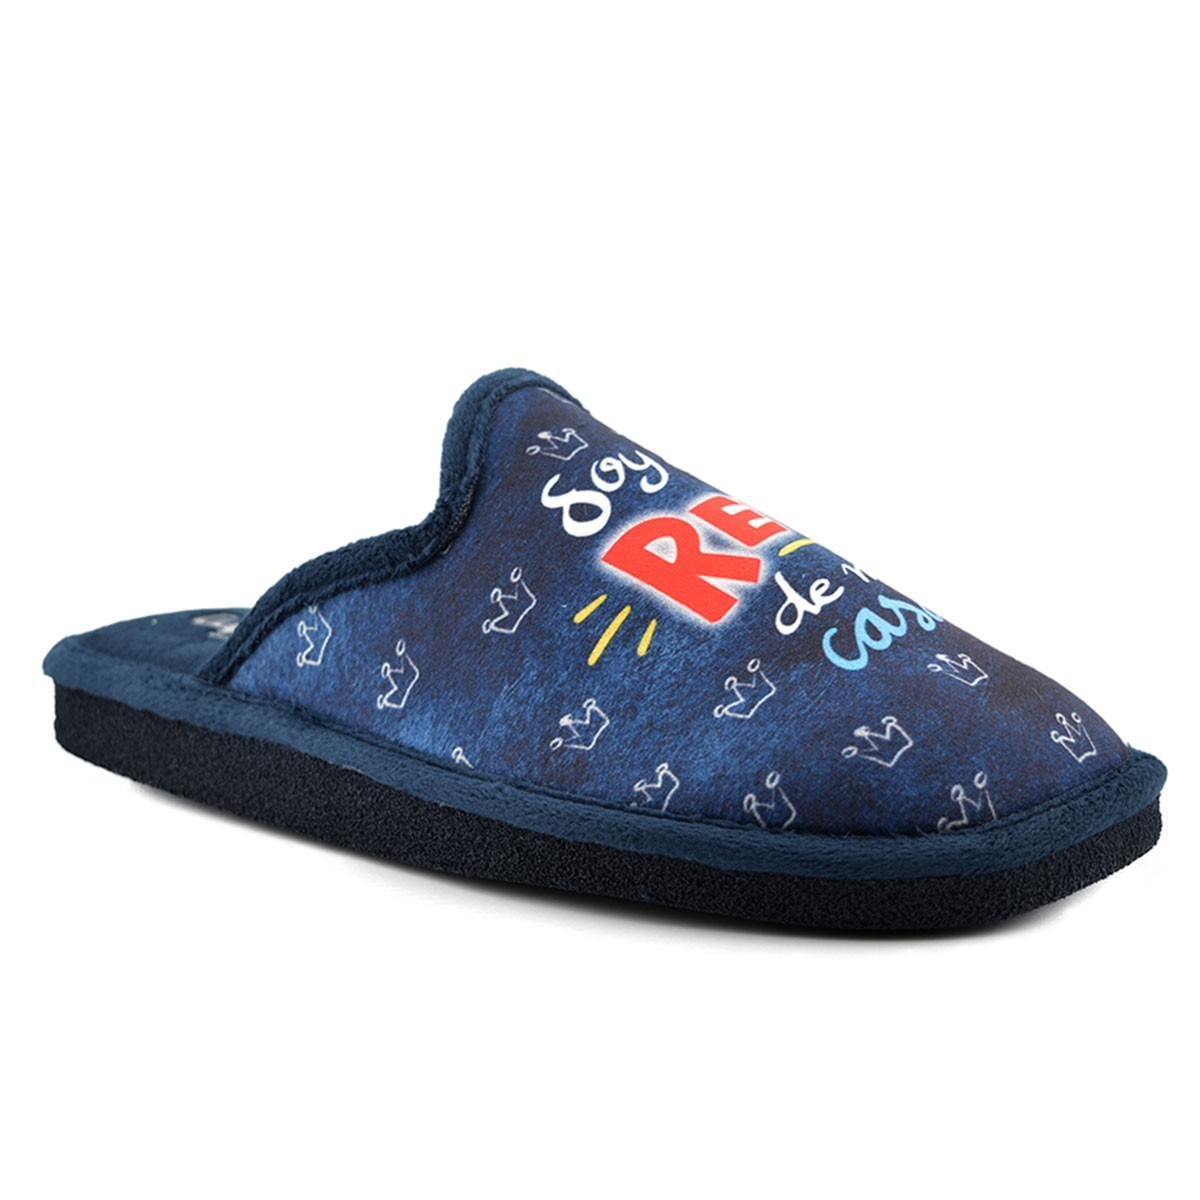 Blue House Slippers for men by Tupie Home